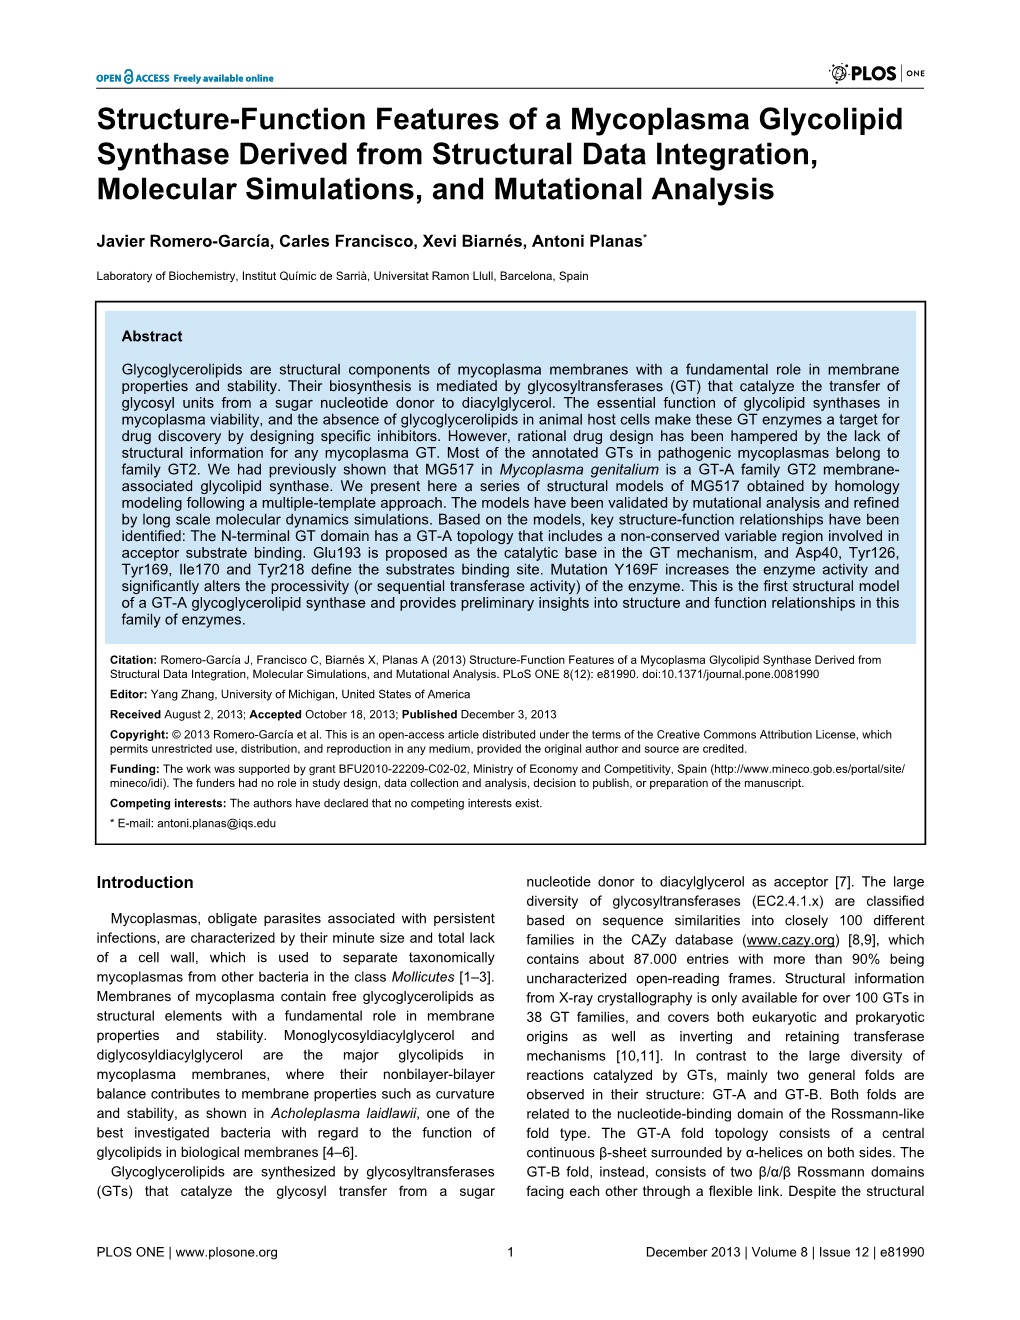 Structure-Function Features of a Mycoplasma Glycolipid Synthase Derived from Structural Data Integration, Molecular Simulations, and Mutational Analysis